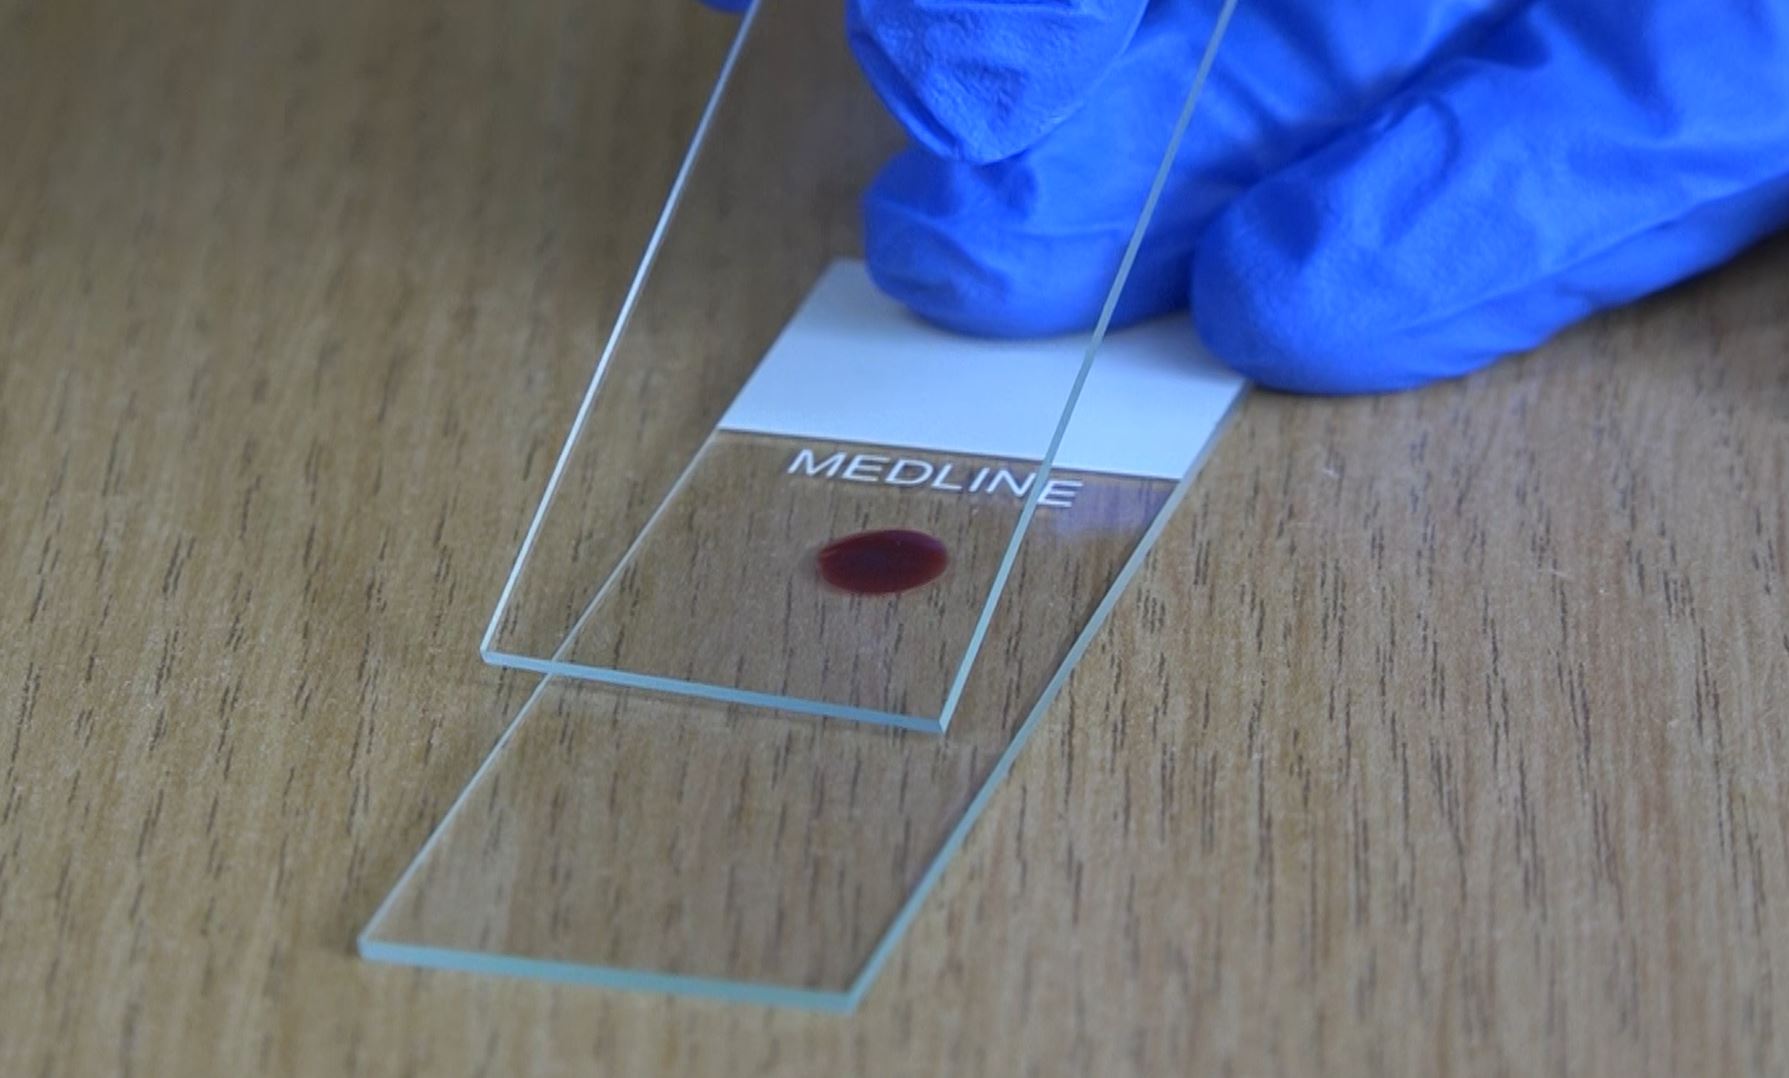 A gloved hand holds a glass slide with a blood sample on it, labeled 